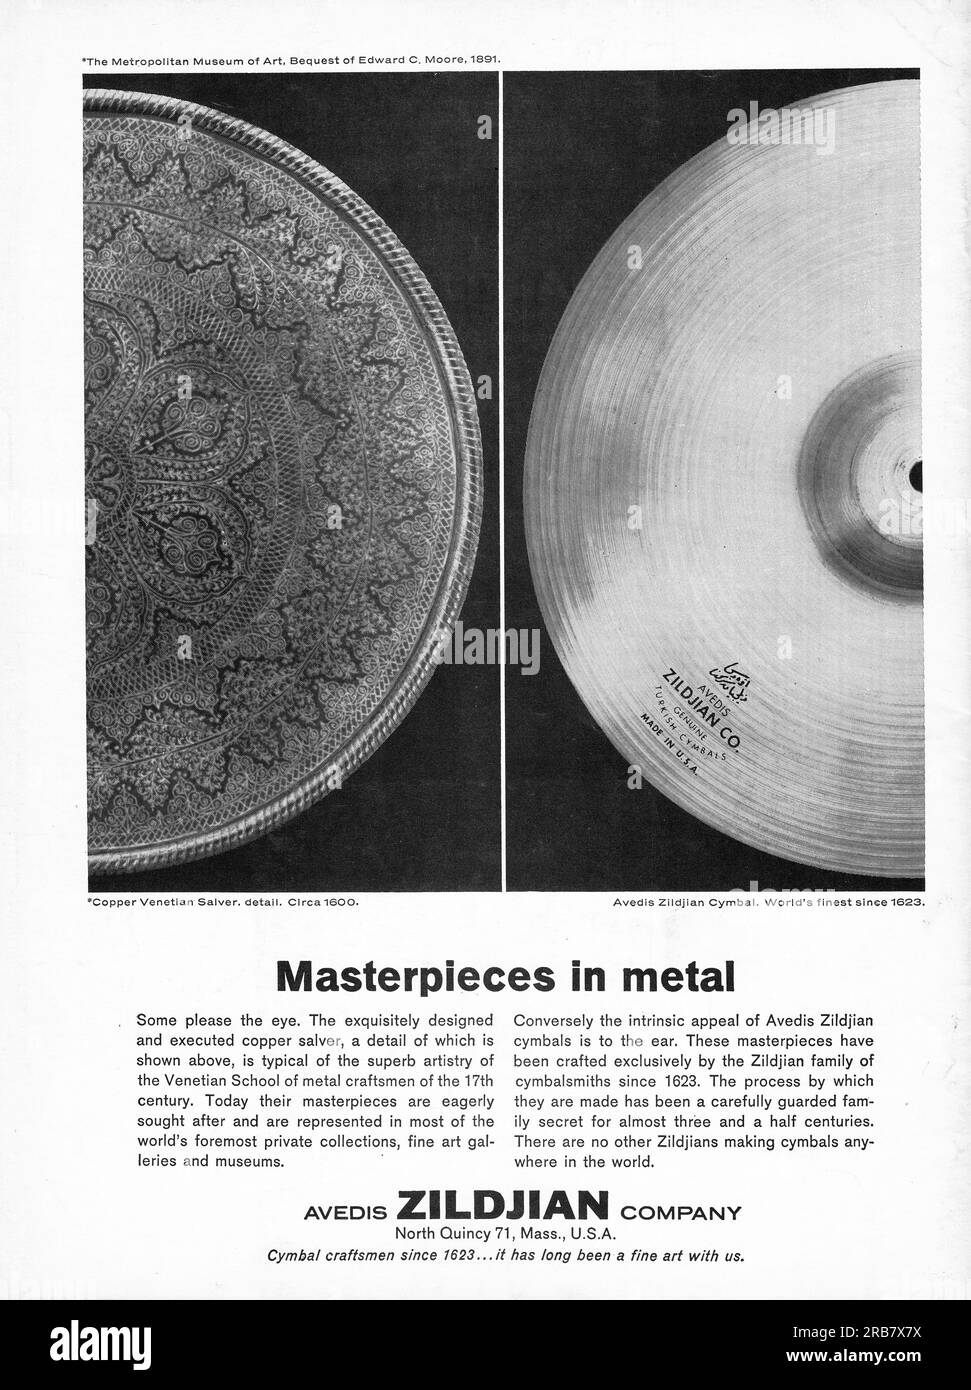 An advertisement for Avis Zildjian cymbals citing their 350+ year history as cymbalsmiths. From an early 1960's magazine. Stock Photo